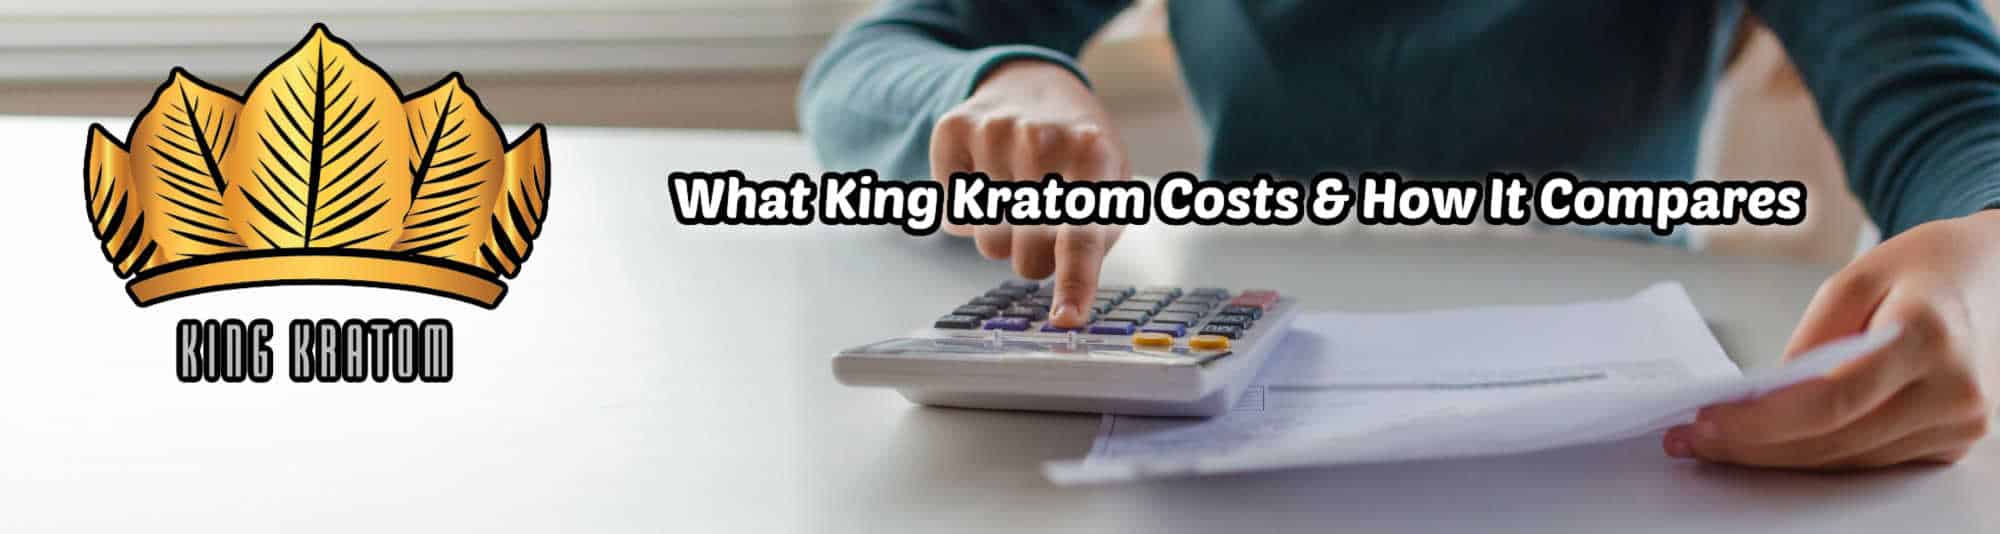 image of what king kratom costs and how it compares